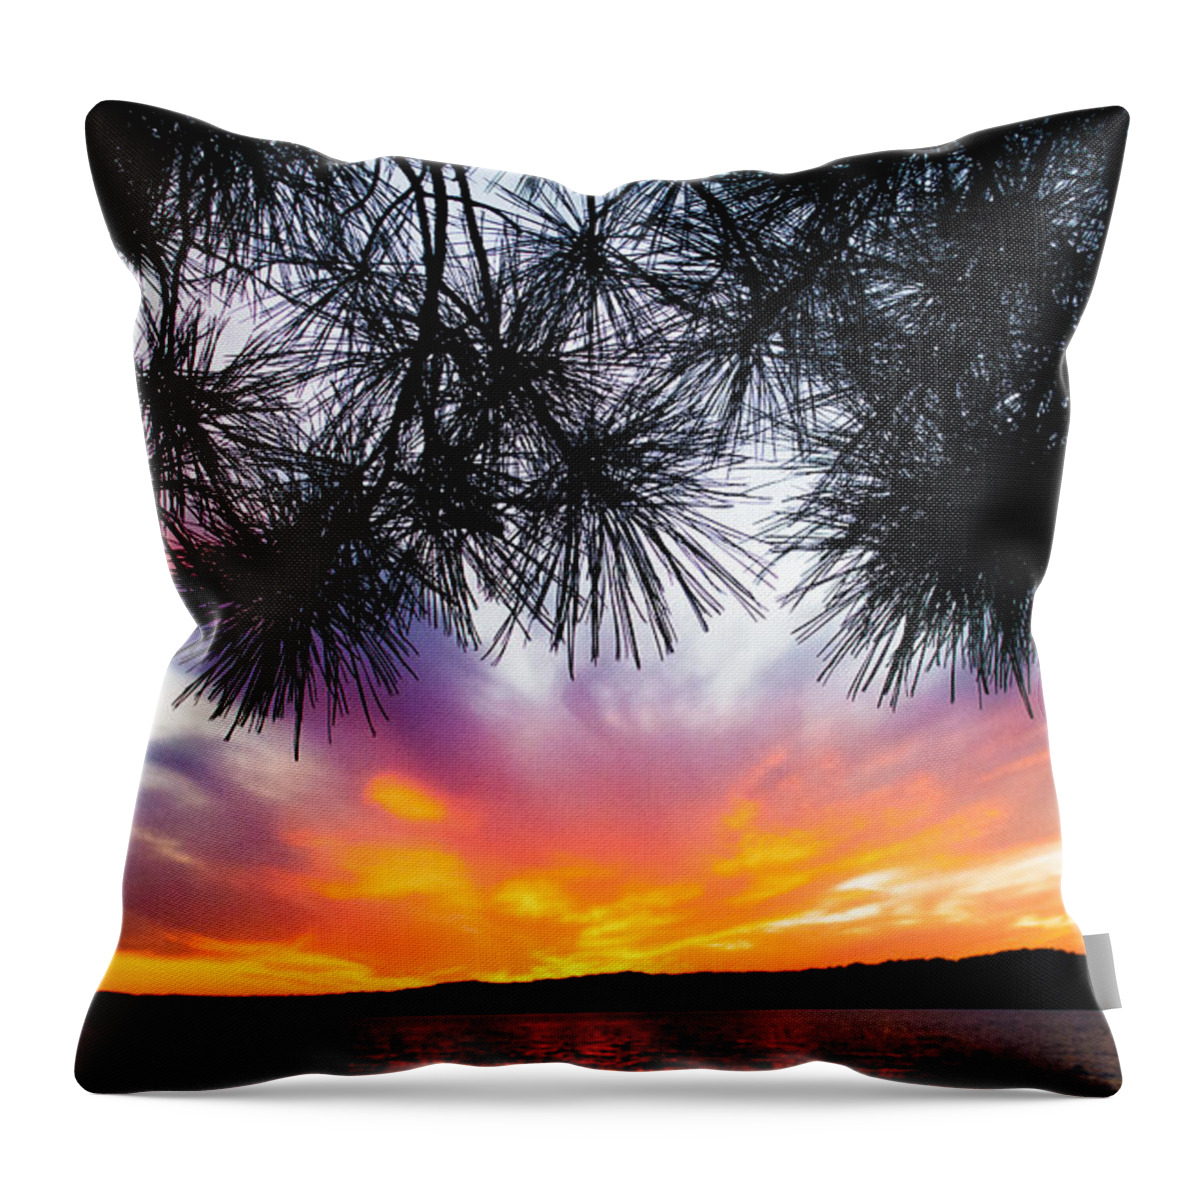 Tropical Sunset Throw Pillow featuring the photograph Tropical Sunset by Parker Cunningham